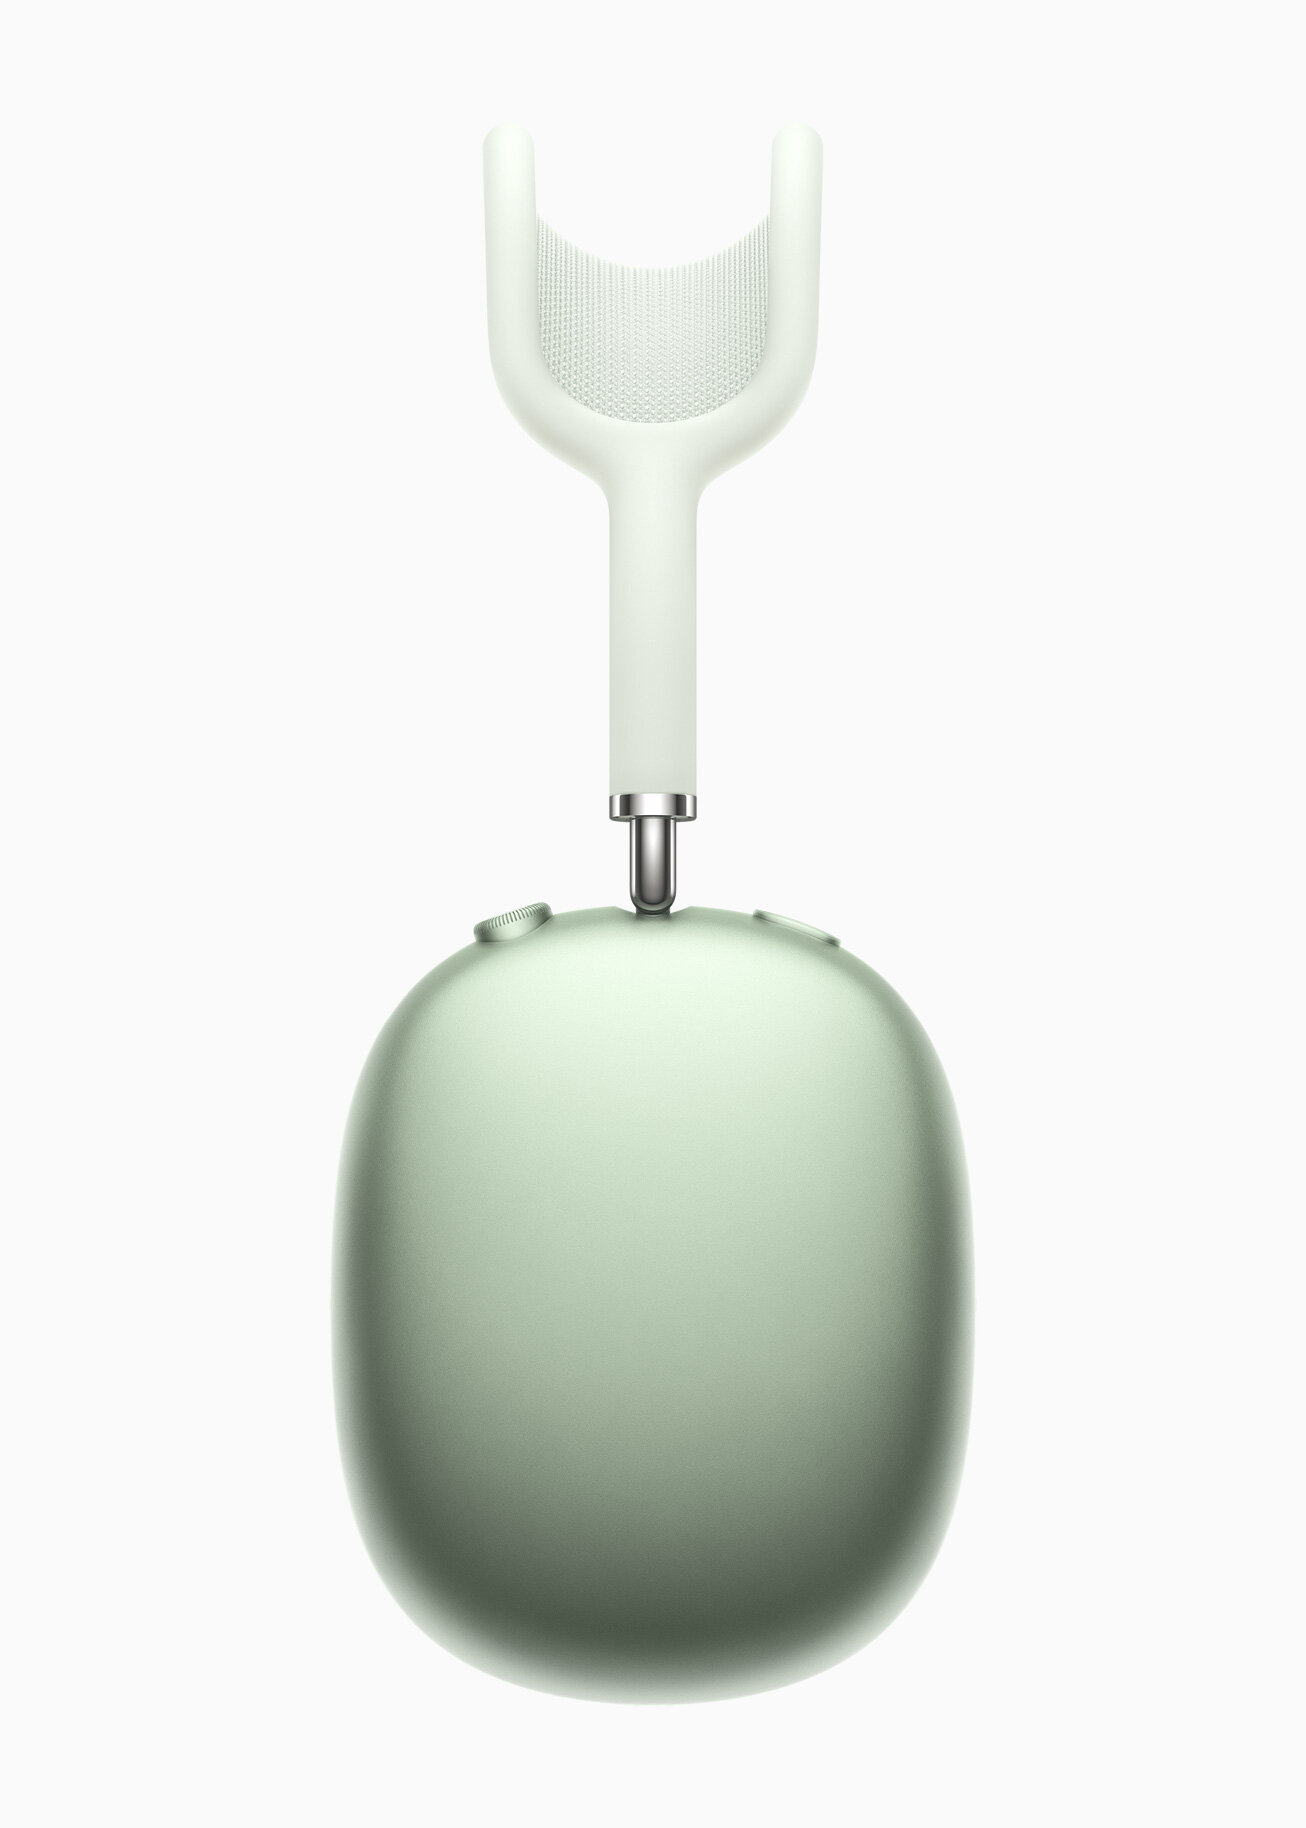 apple_airpods-max_color-green_12082020_carousel.jpg.large_2x.jpg